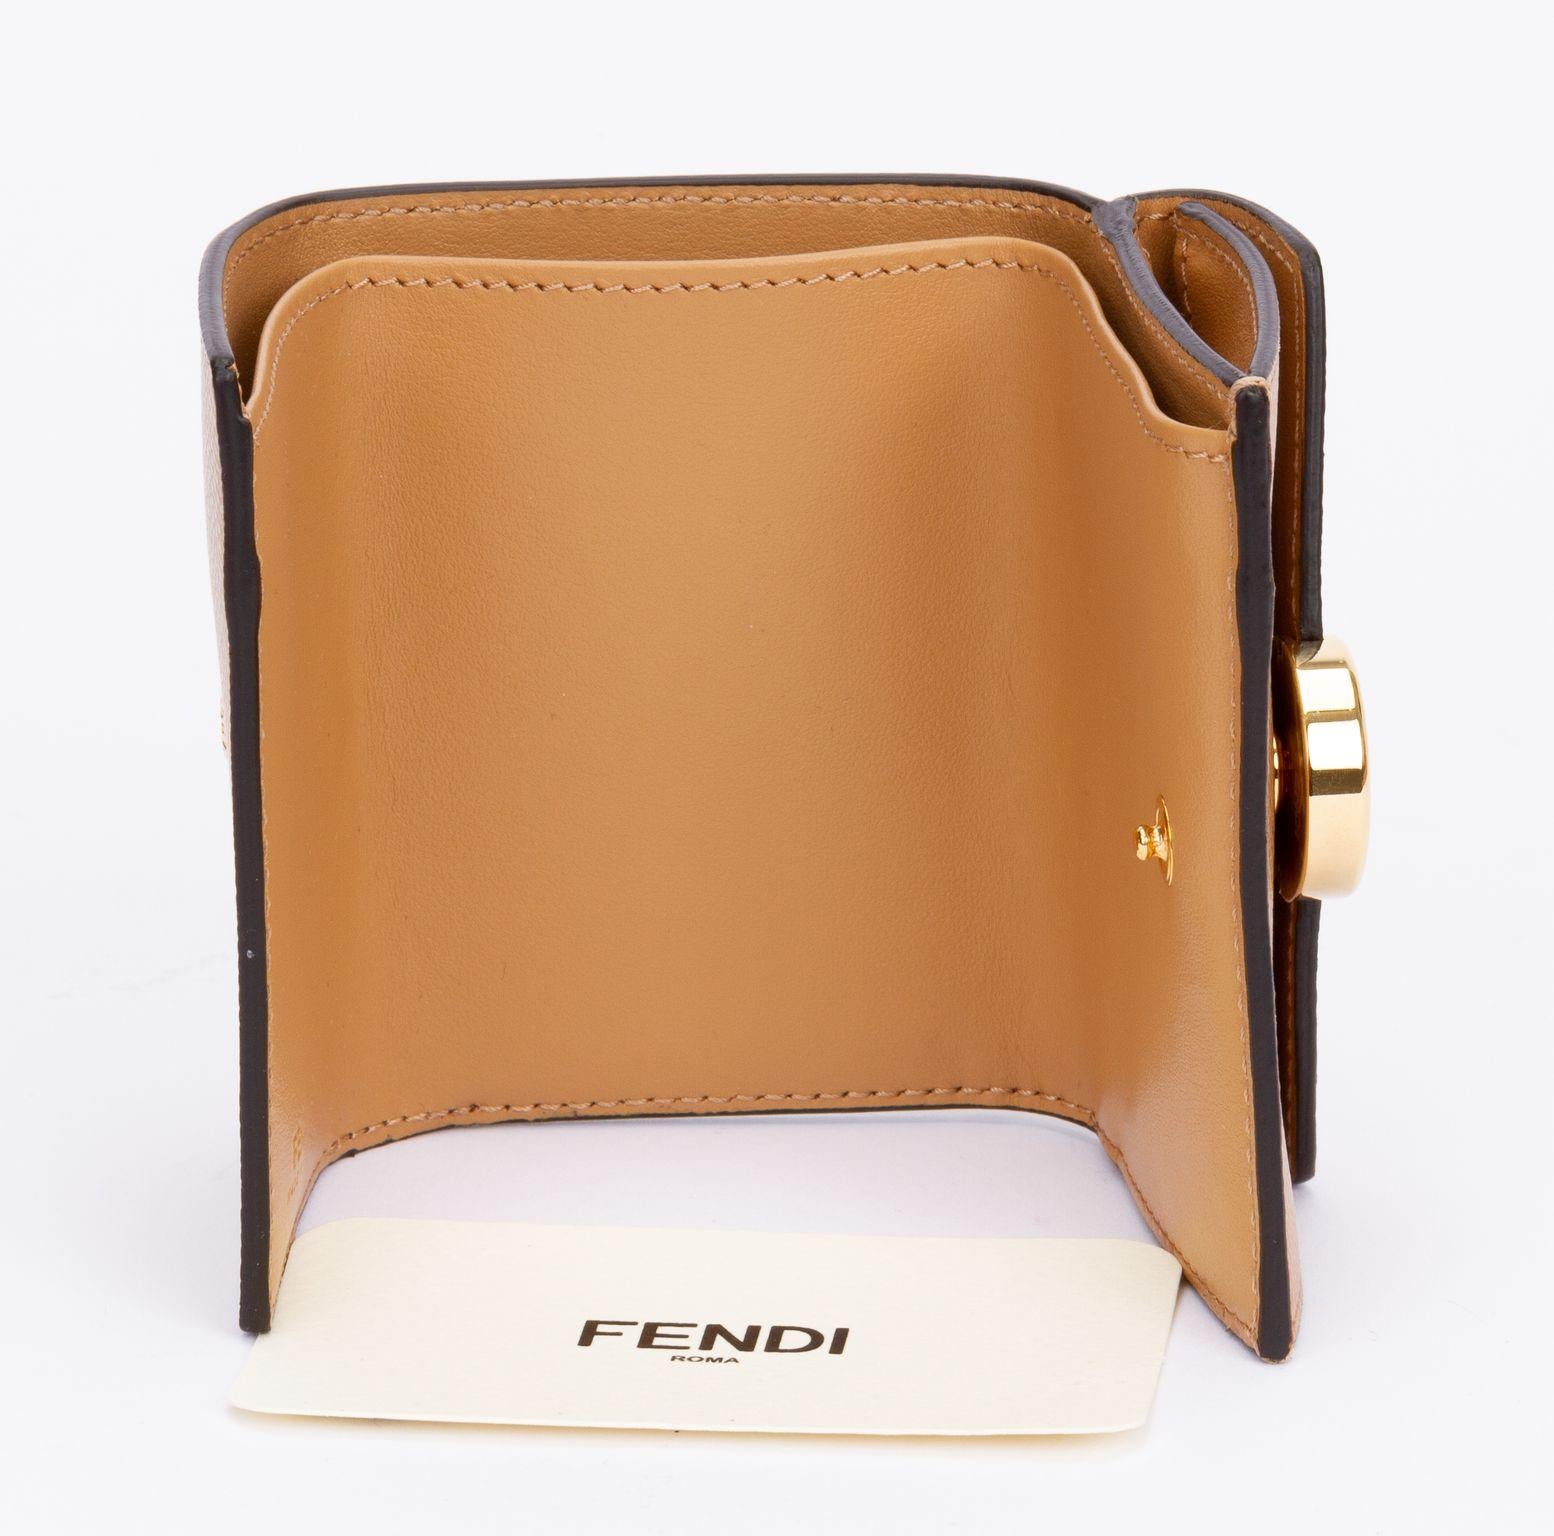 Fendi BNIB Beige Wallet In New Condition For Sale In West Hollywood, CA